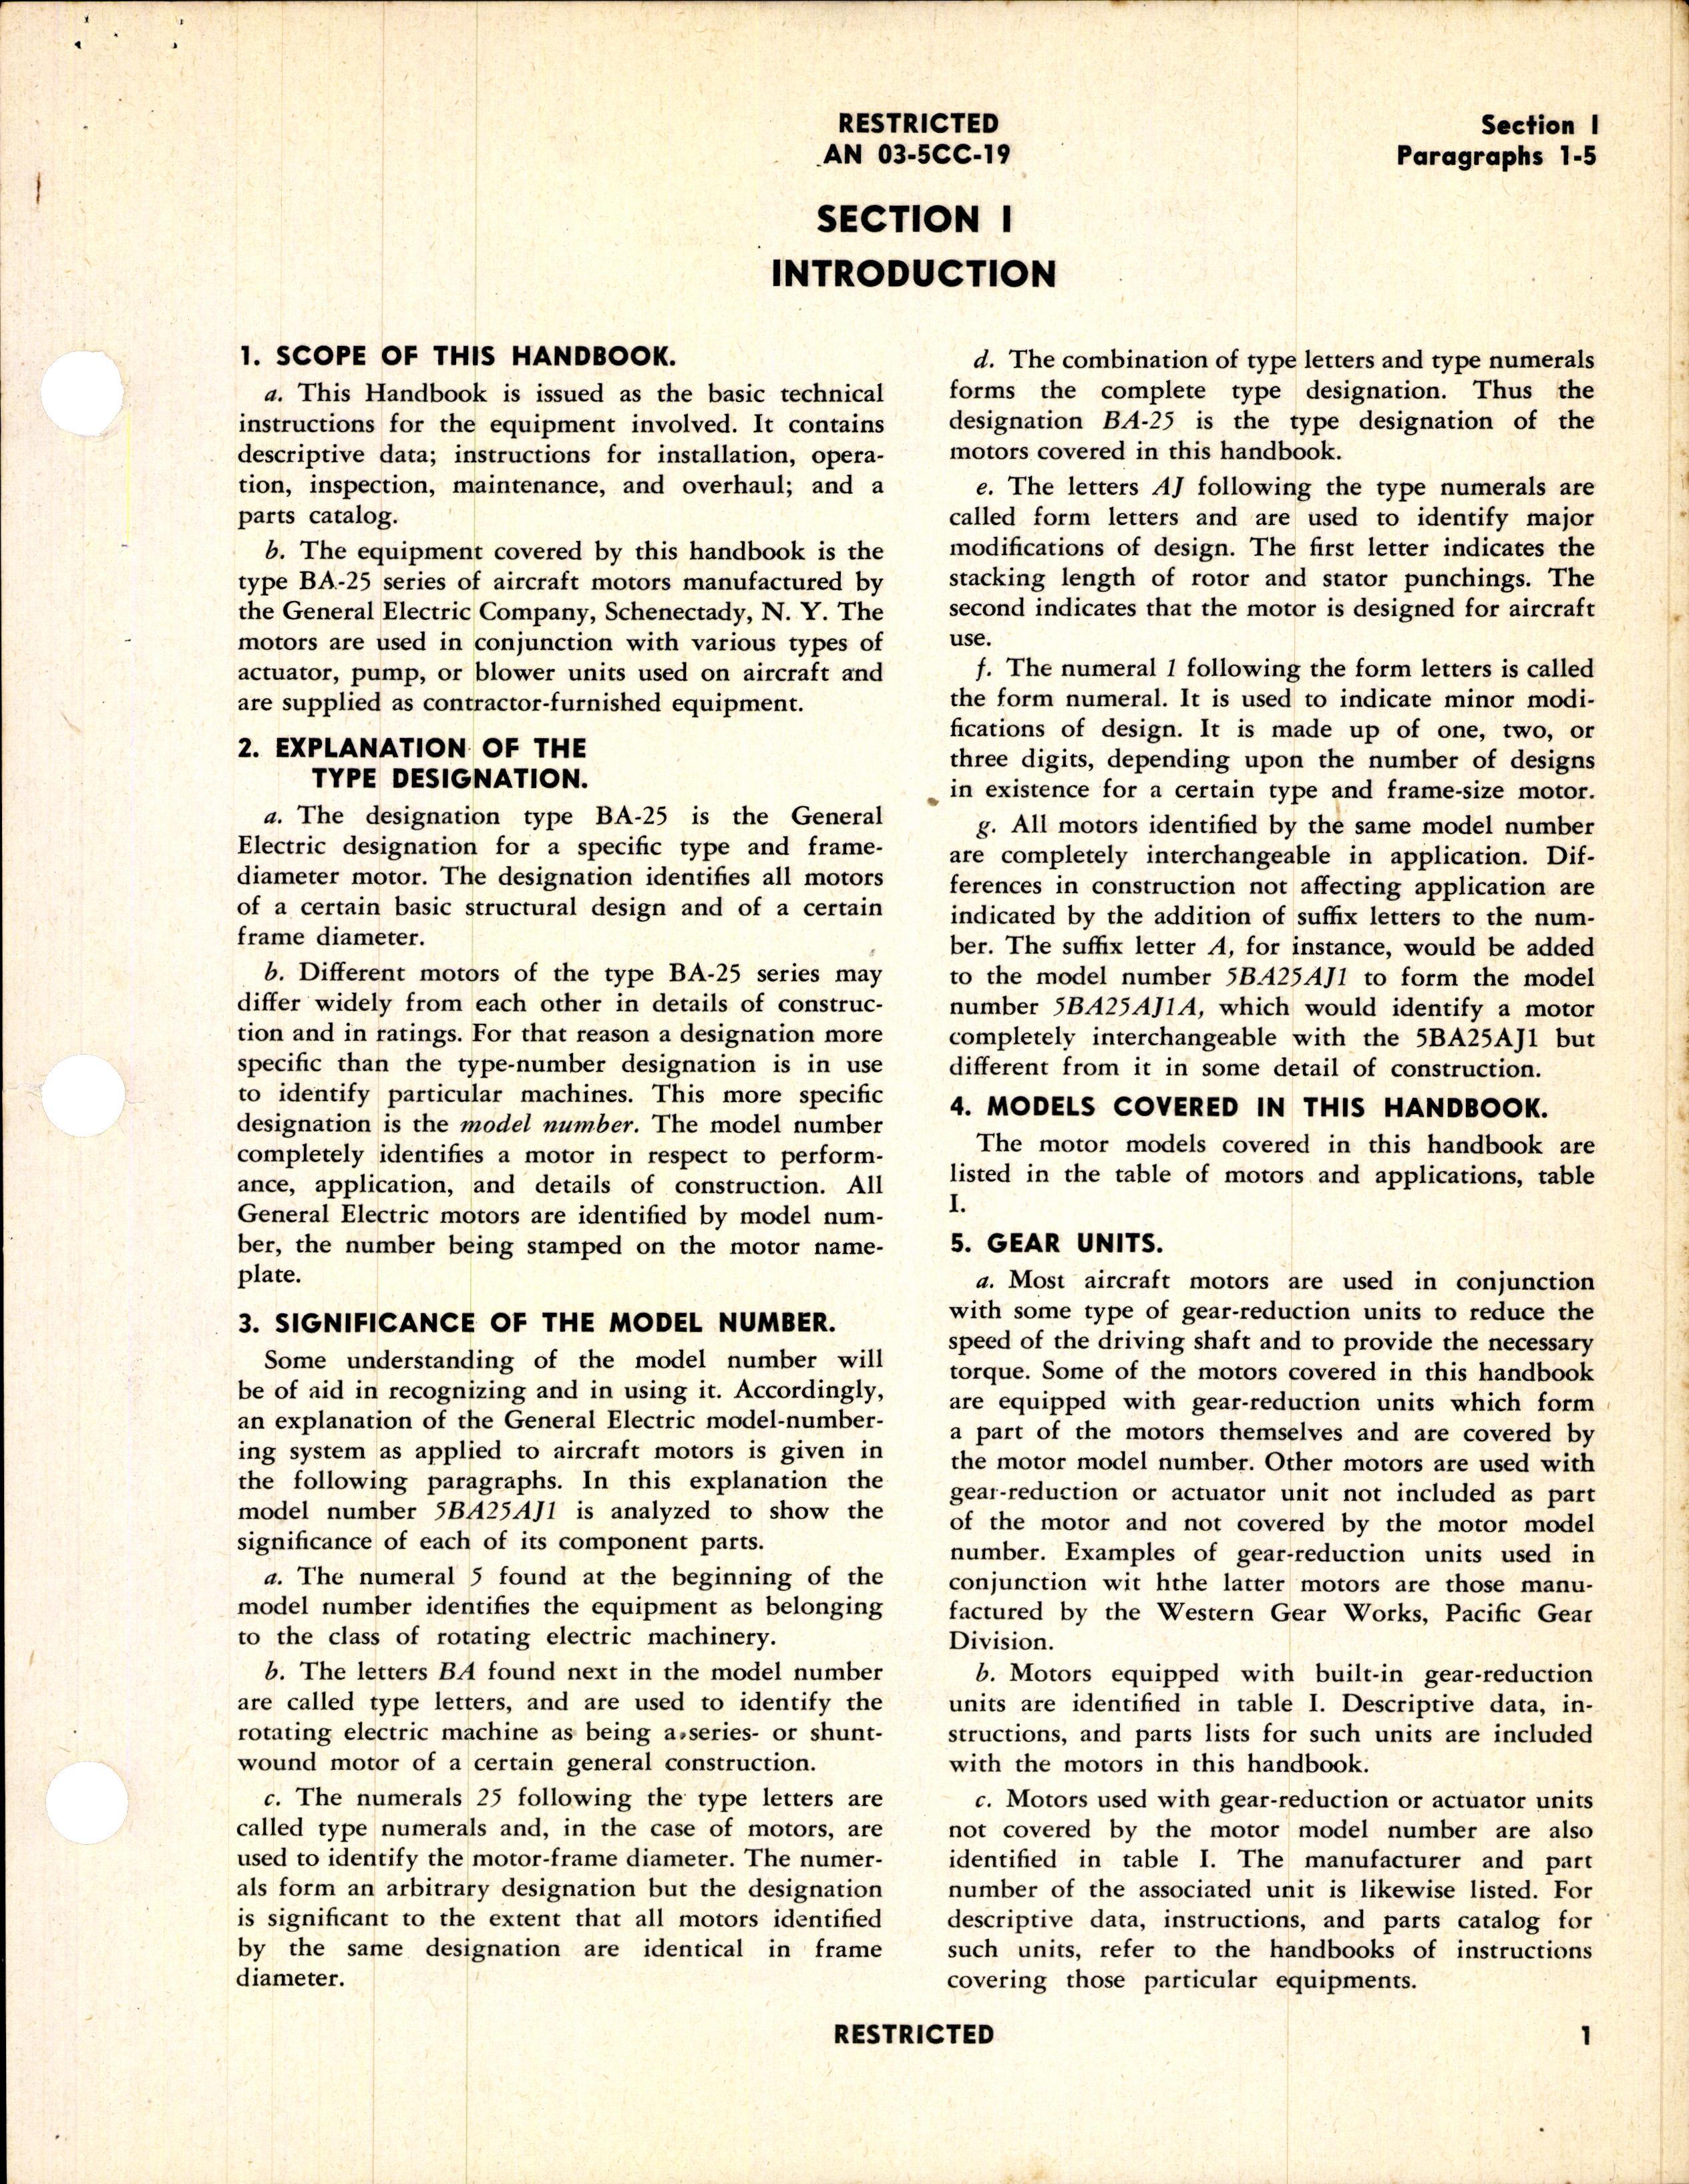 Sample page 3 from AirCorps Library document: Operation, Service, & Overhaul Inst w/ Parts Catalog for Aircraft Motors Model 5BA25 Series